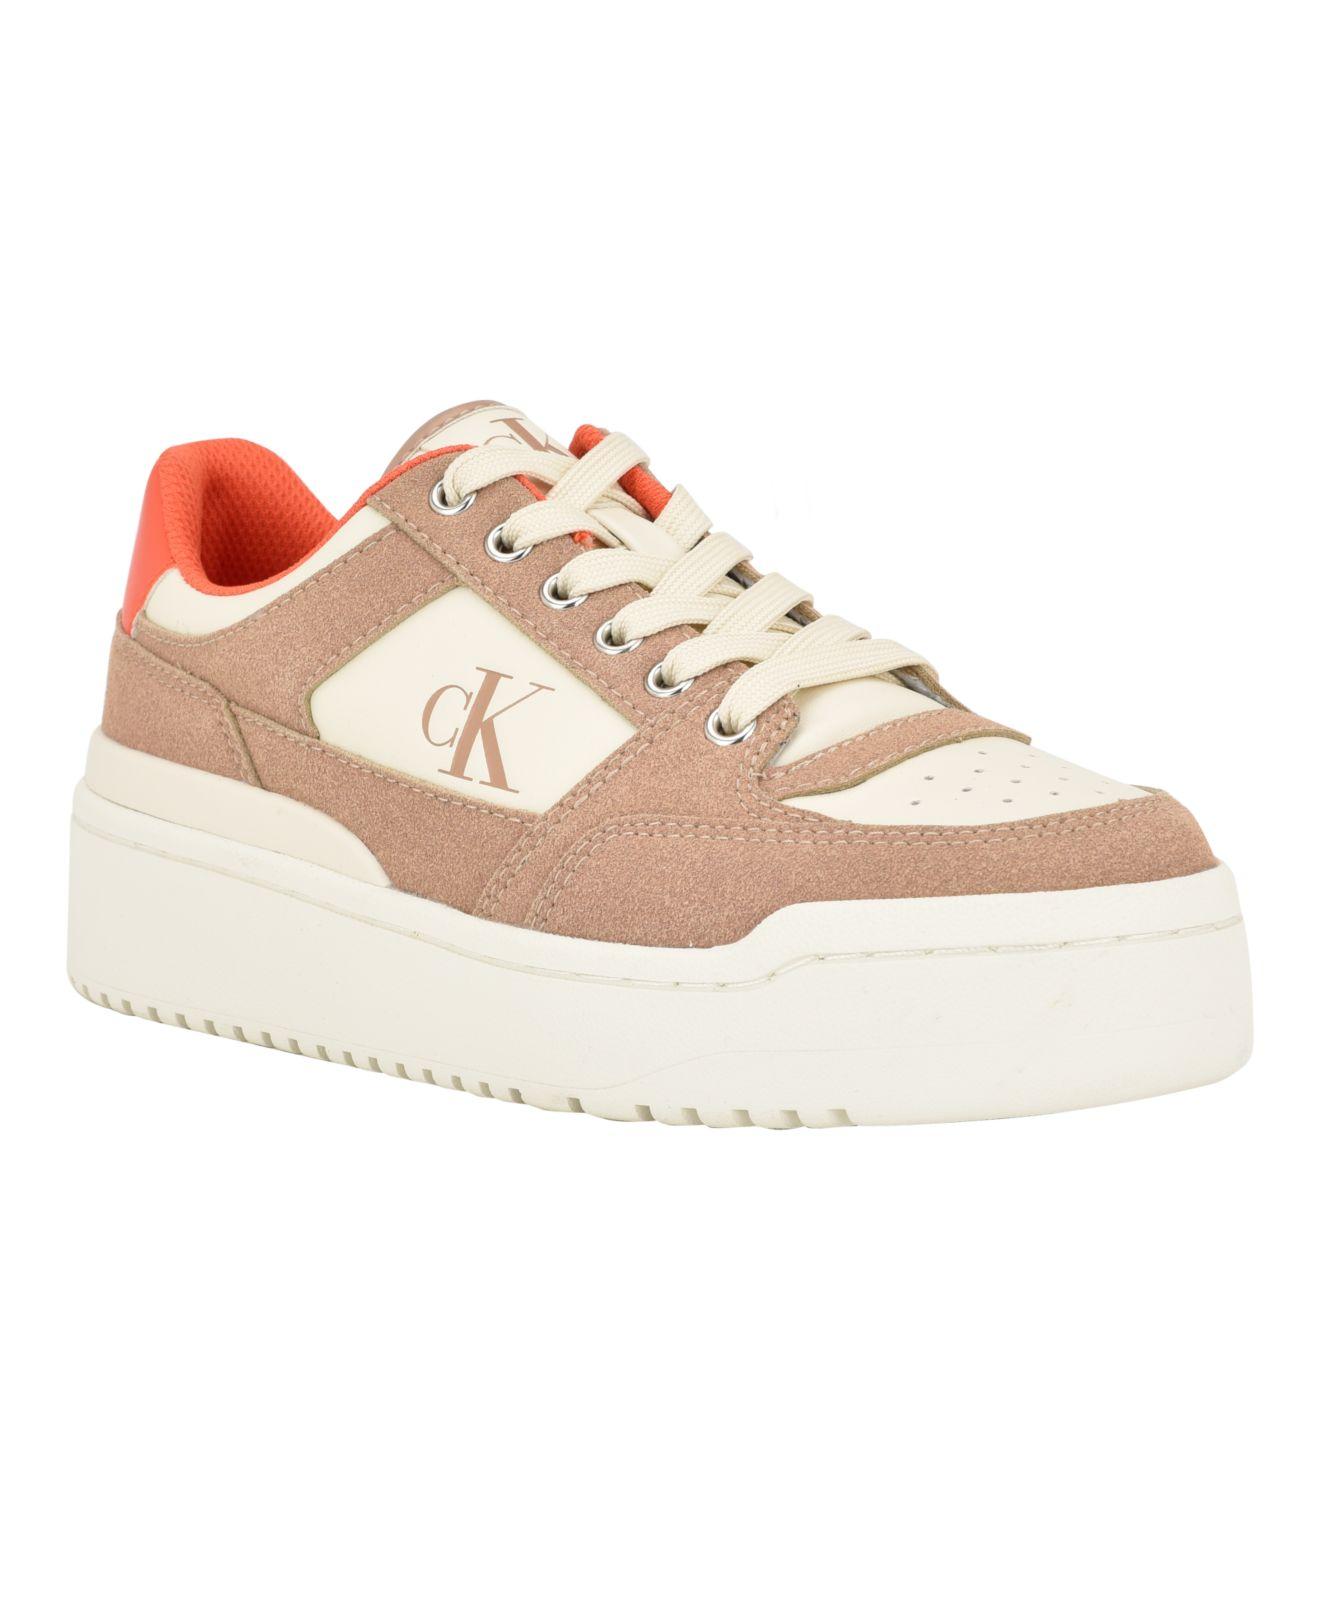 Calvin Klein Alondra Casual Platform Lace-up Sneakers in Pink | Lyst